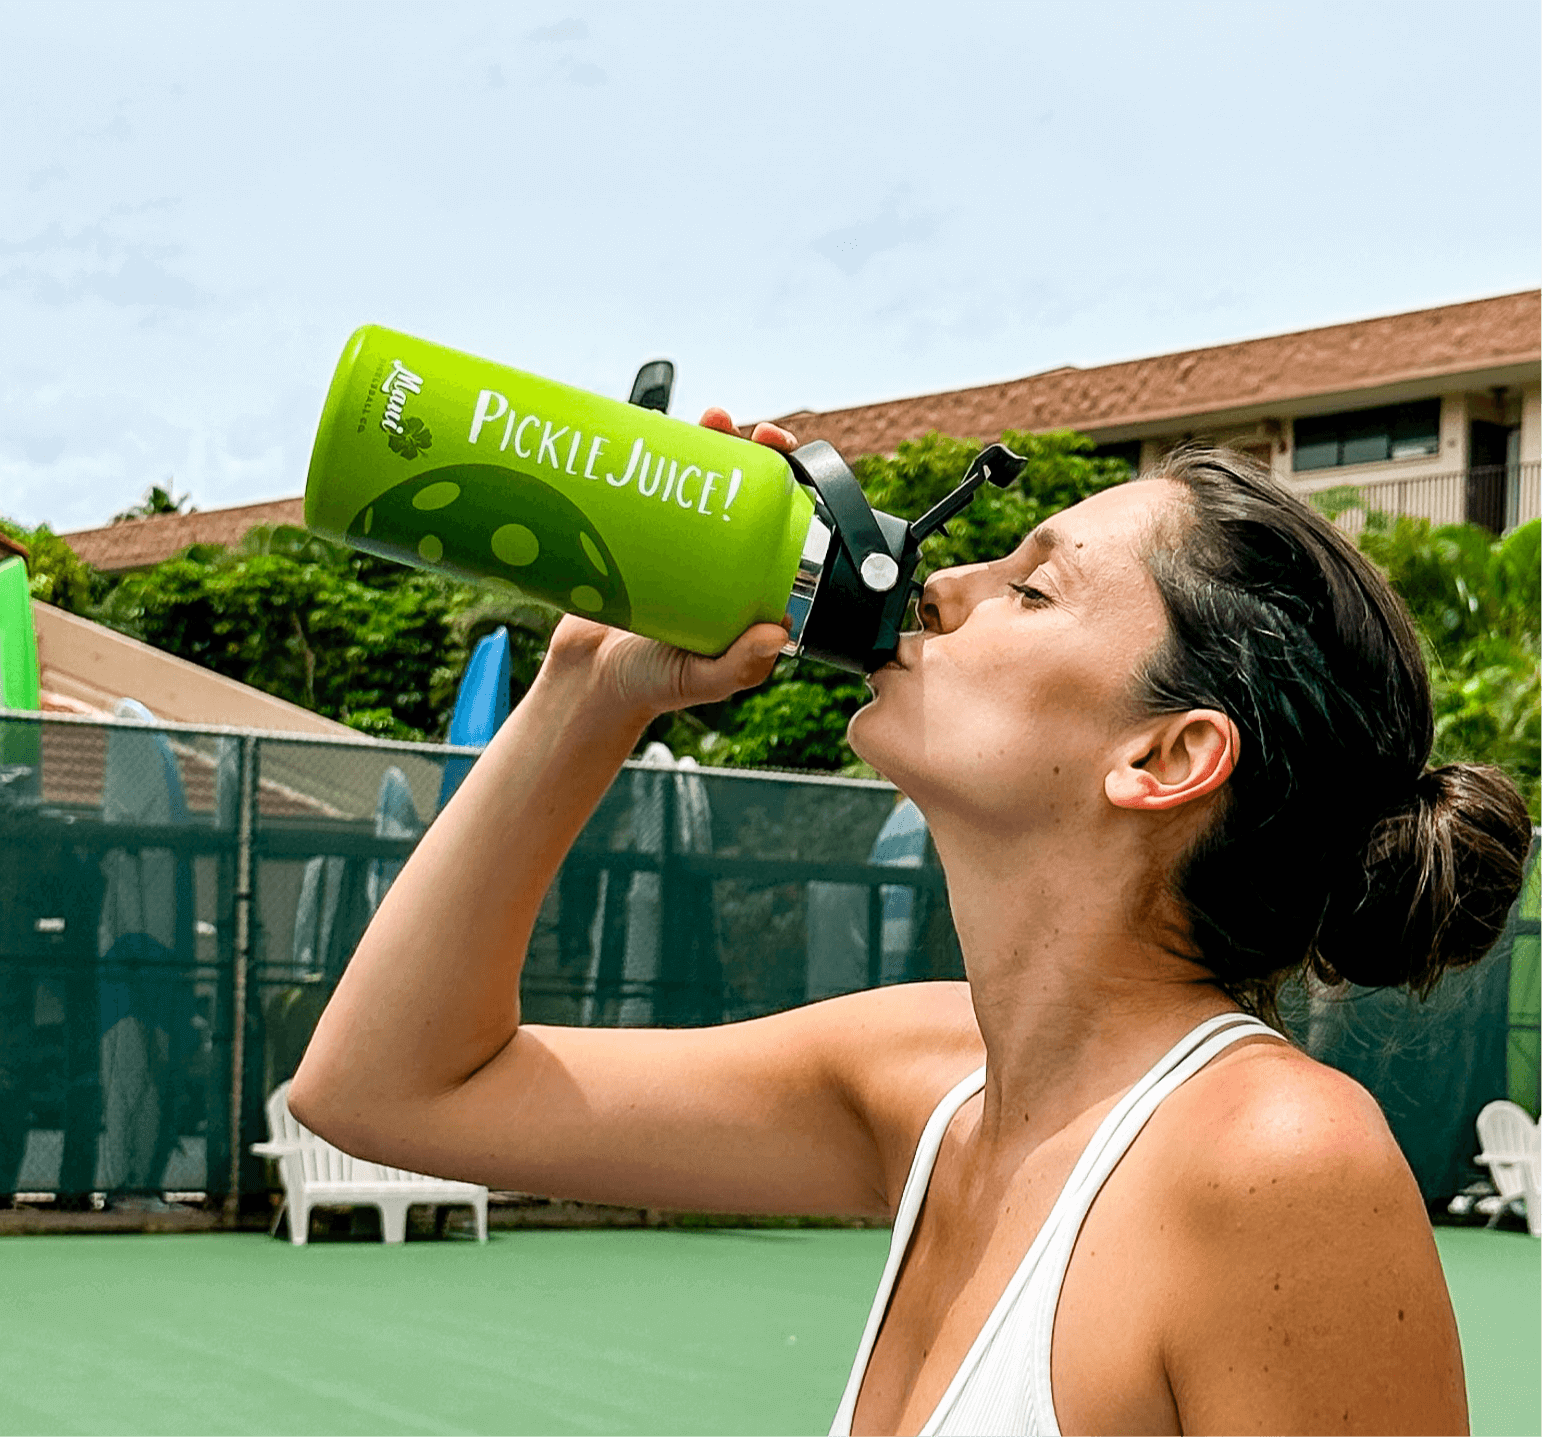 woman drinking from a Pickleball Water bottle, Cool Pickleball gear, pickle-ball equipment,